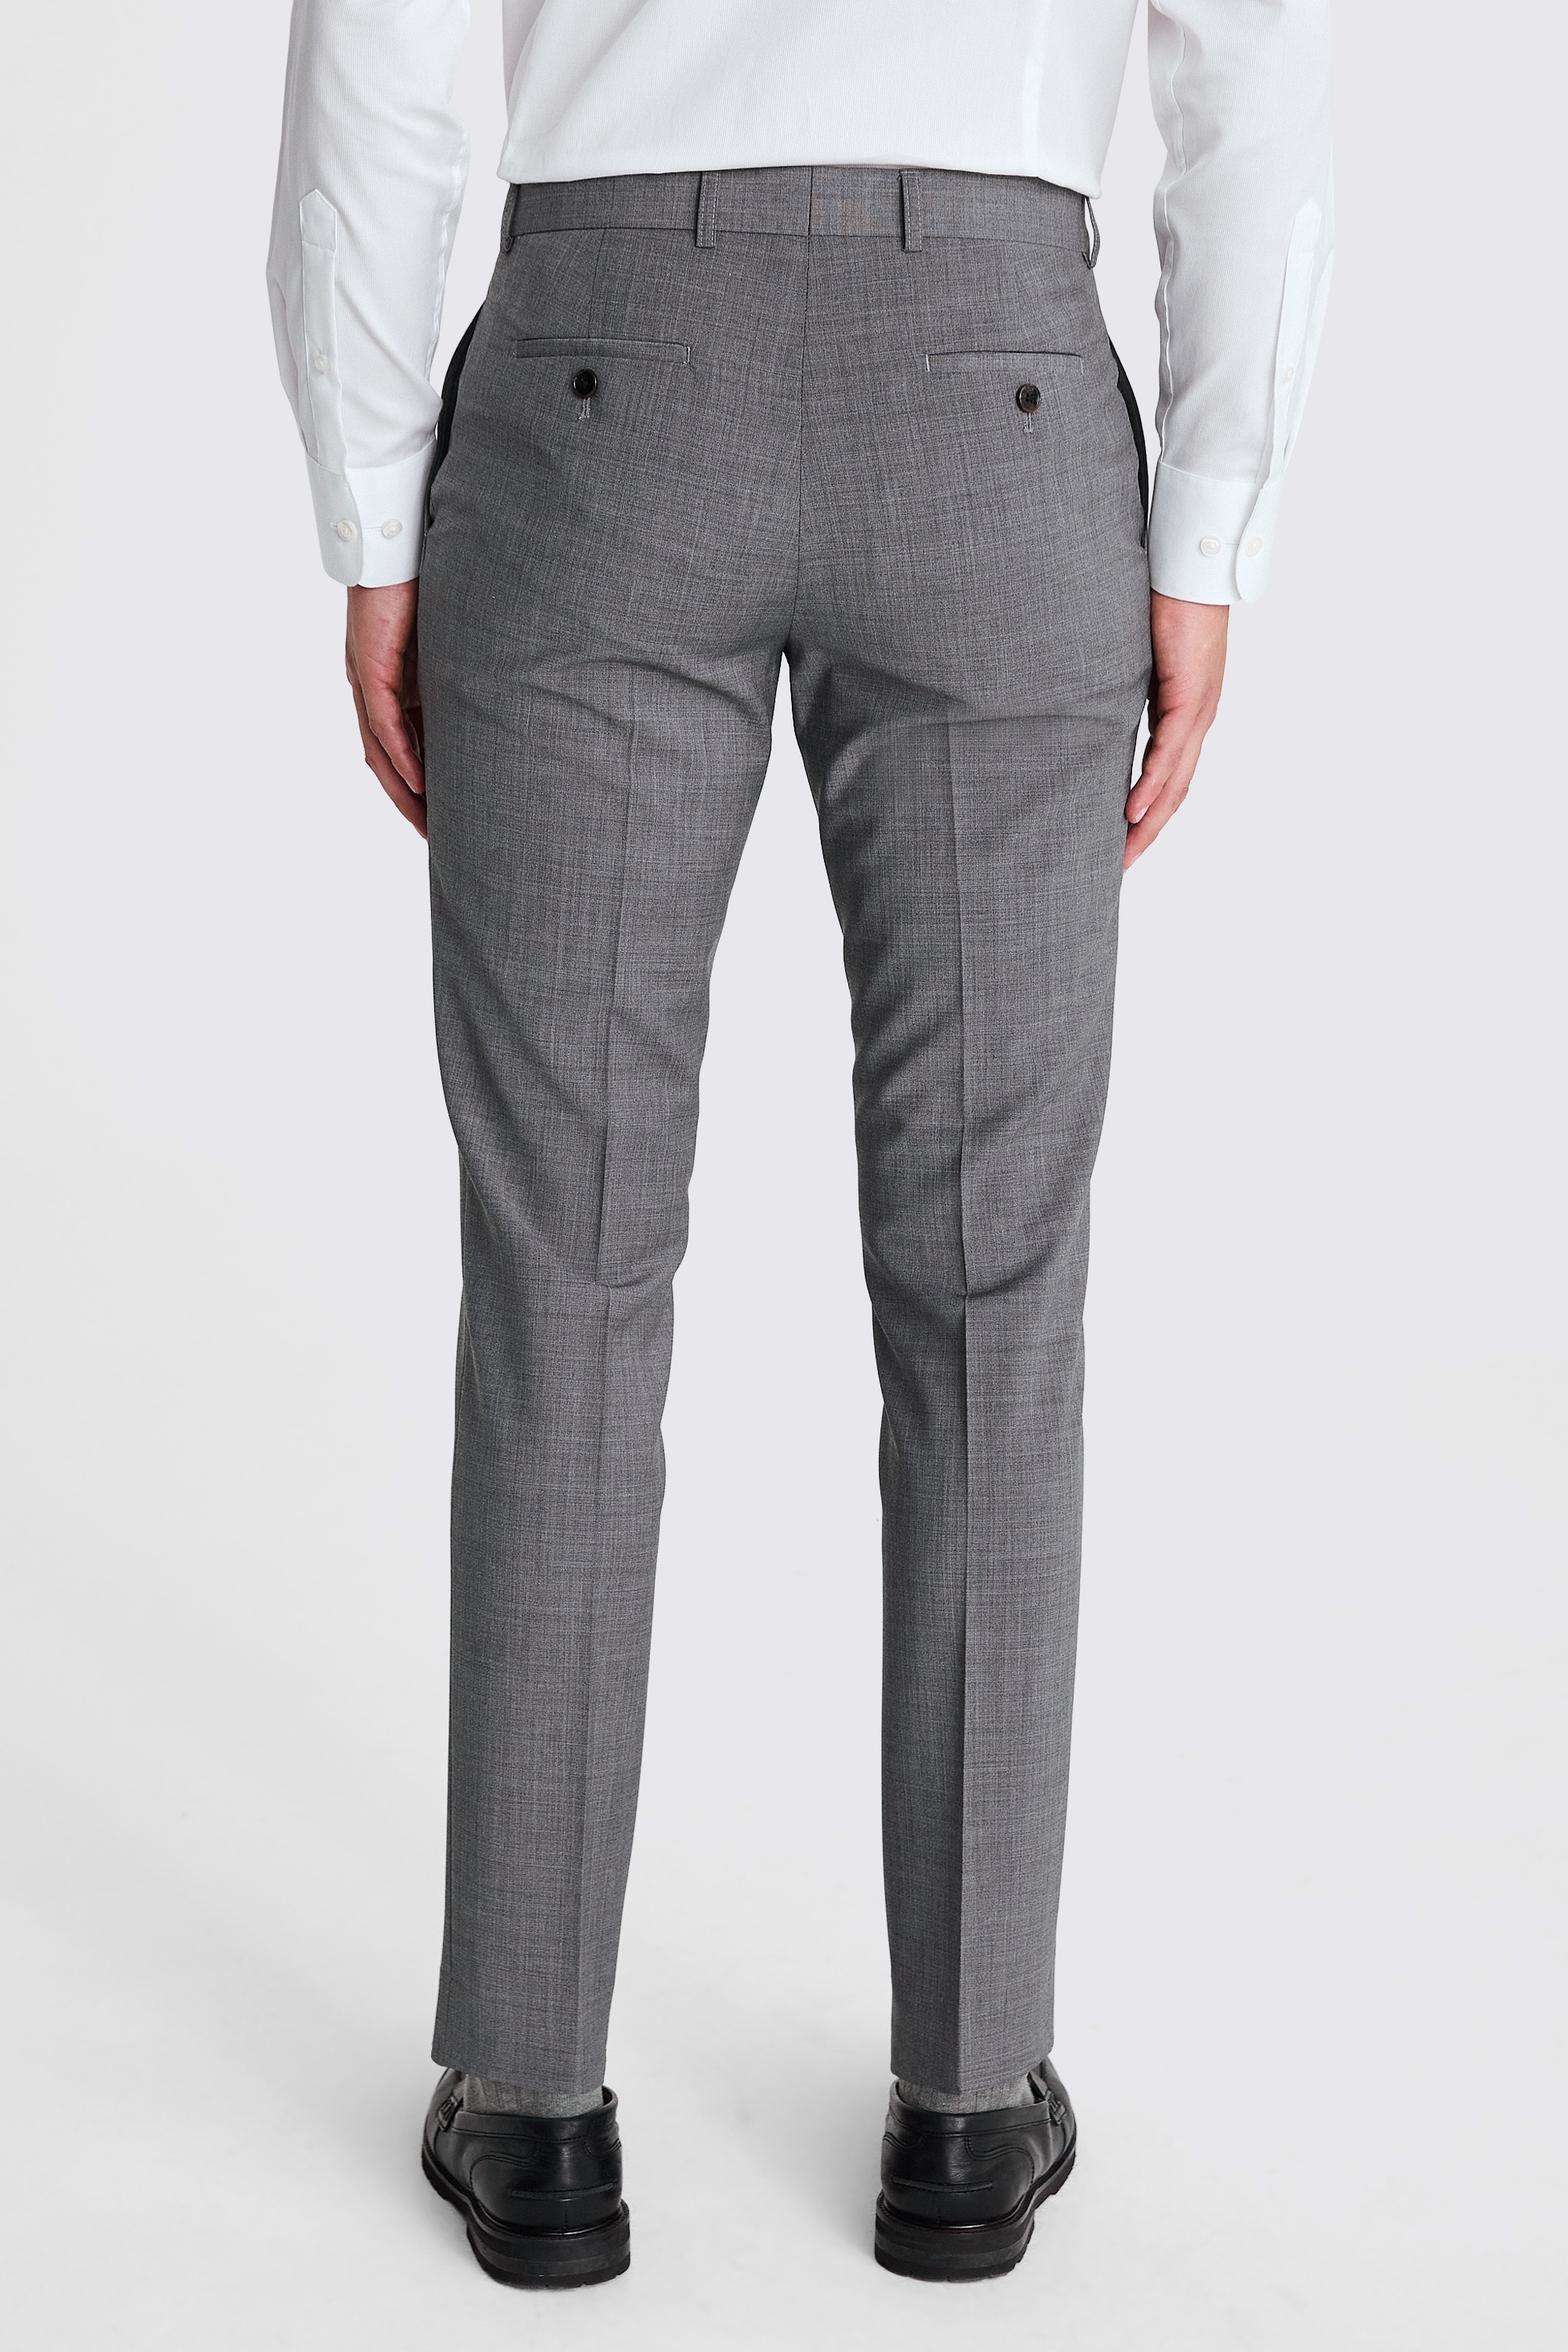 DKNY Slim Fit Grey Trousers | Buy Online at Moss